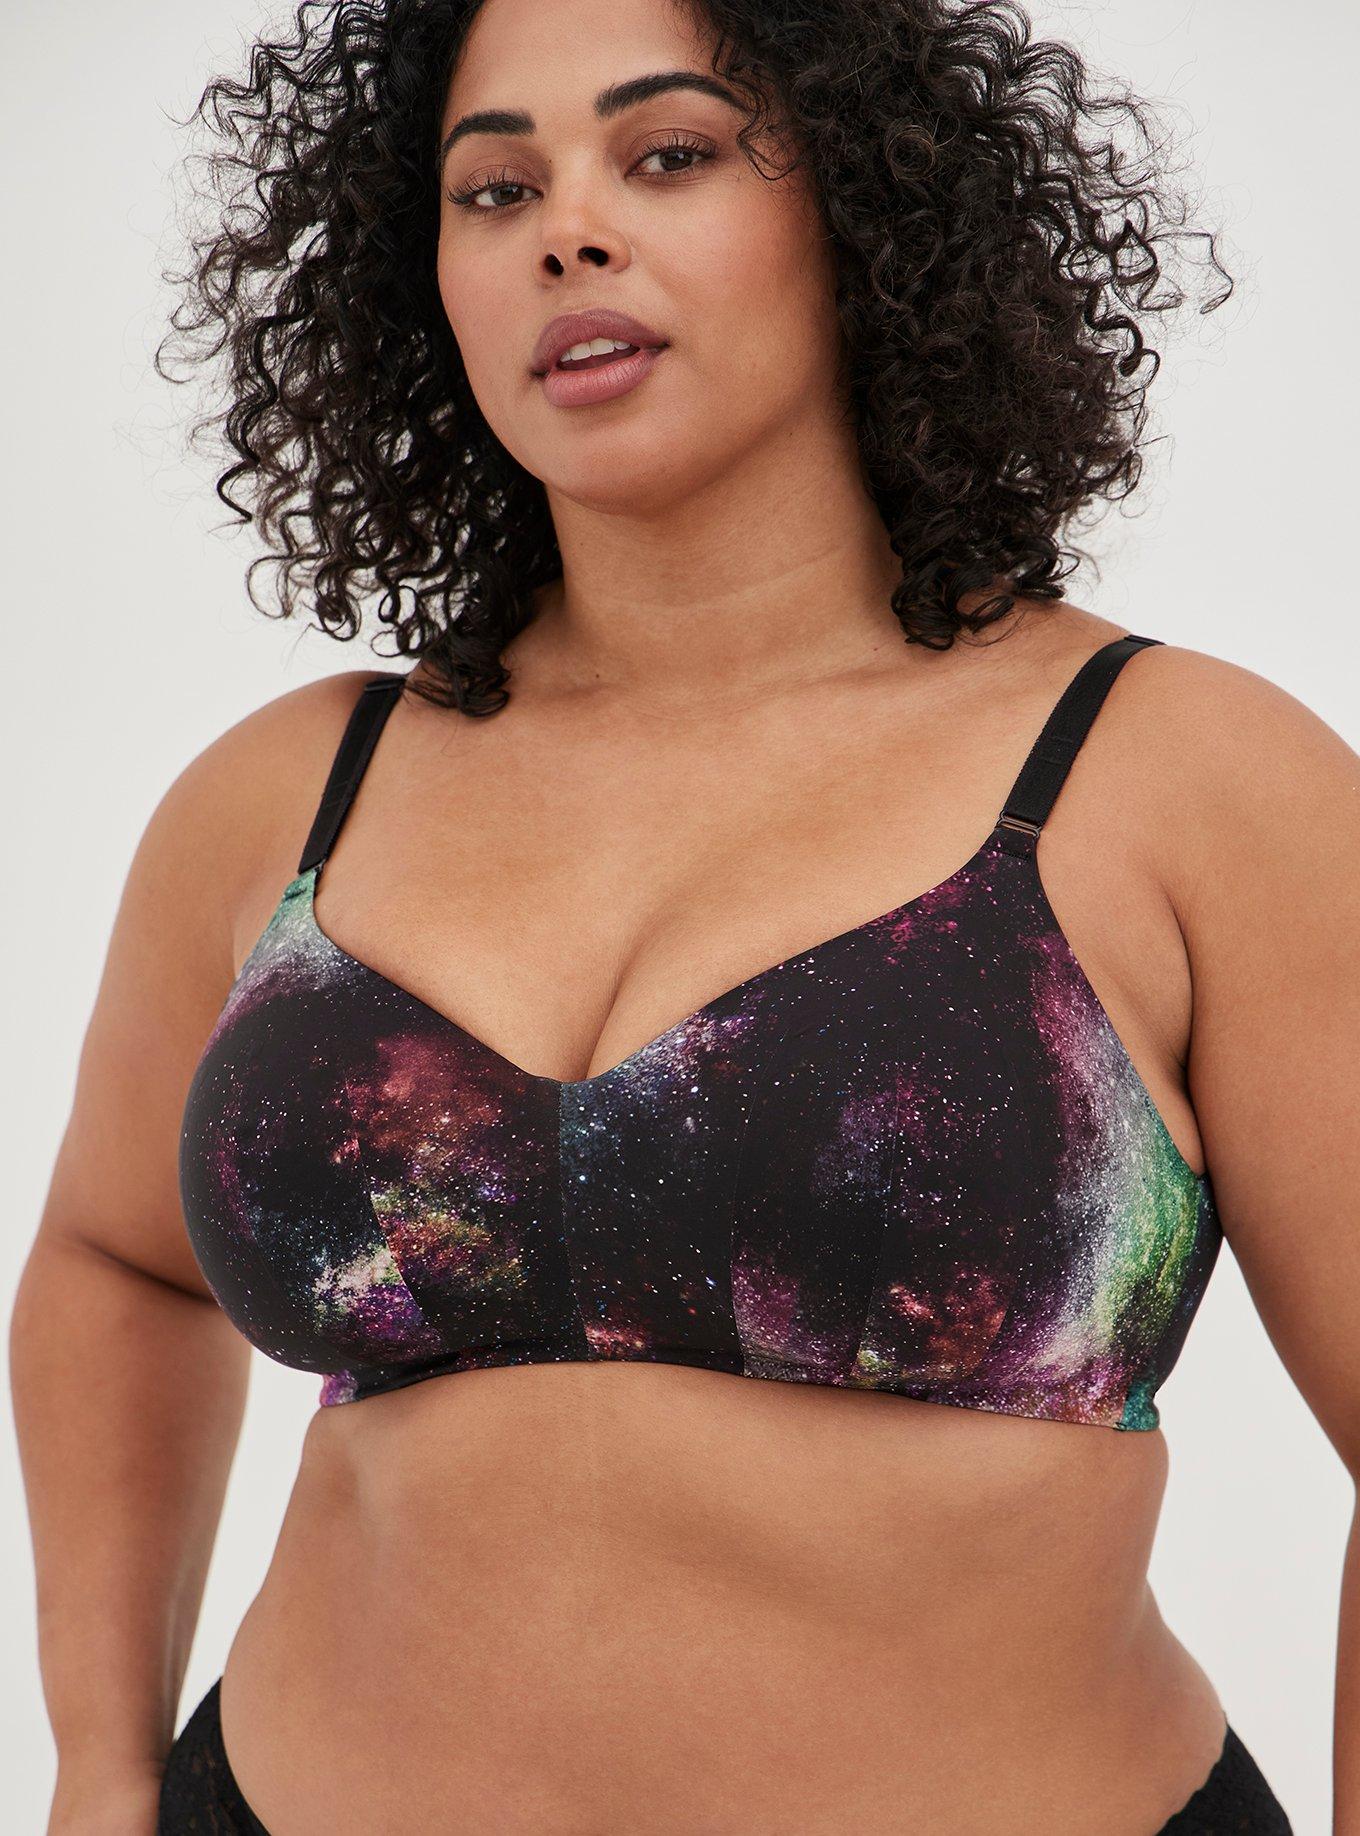 Sports Bras for sale in Angus, Ontario